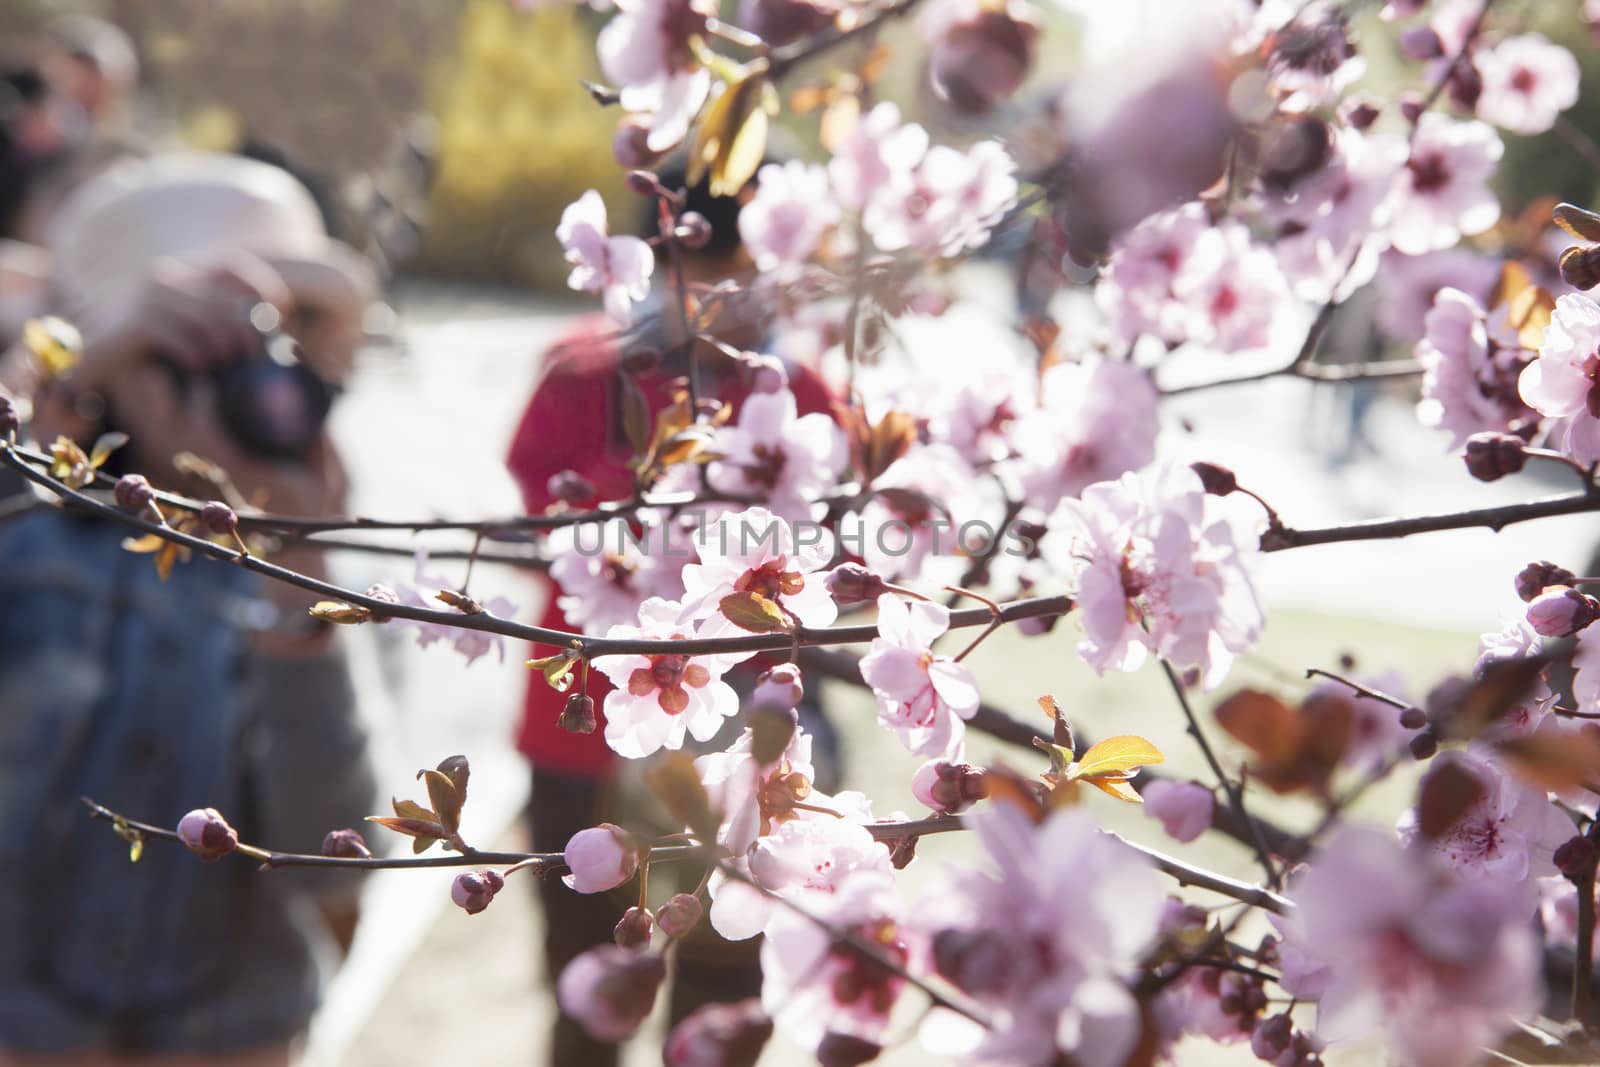 Close up of cherry blossoms on a branch with people taking photographs of them in the background, springtime, Beijing